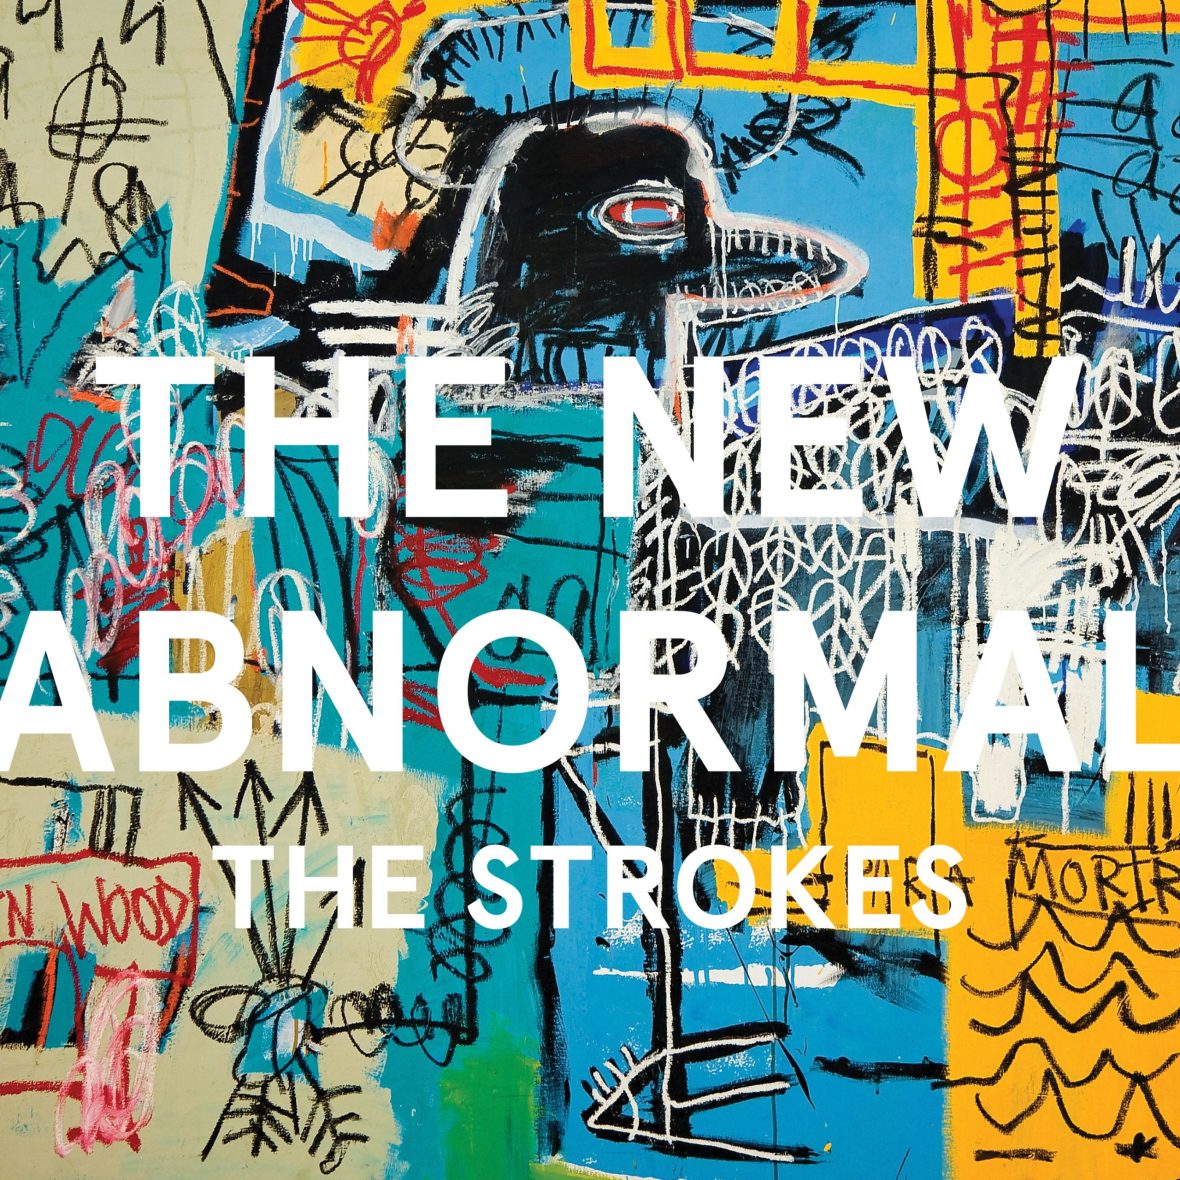 The Strokes - The New Abnormal